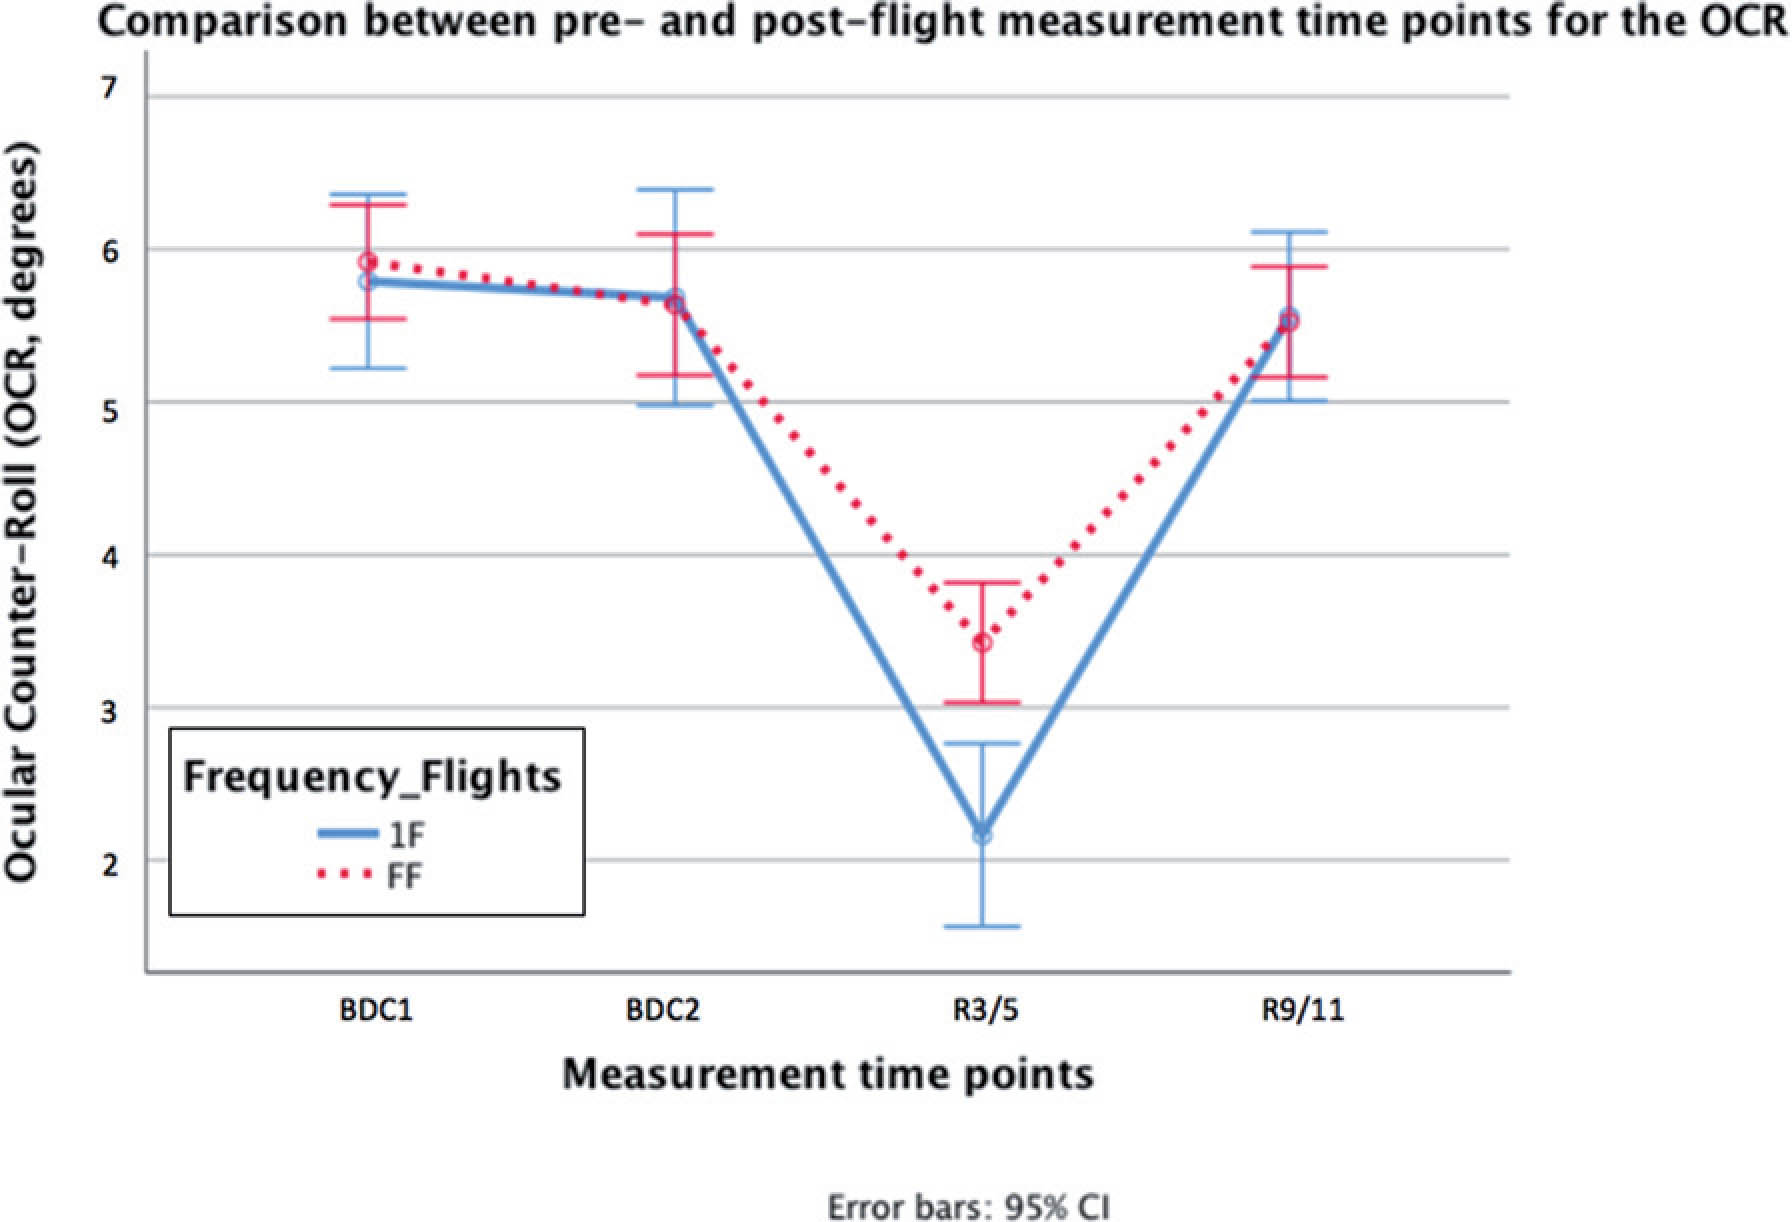 Visual representation of BDC1, BDC2, R3/5 and R9/11 for the CCW centrifugation. On the x-axis, BDC1 and BDC2 indicates preflight measurements, R3/5 indicates measurement timepoint three to five days after landing and R9/11 nine to eleven days after landing. The y-axis represents the average OCR for these measurement time points. 1F, first-time flyers and FF, frequent flyers.